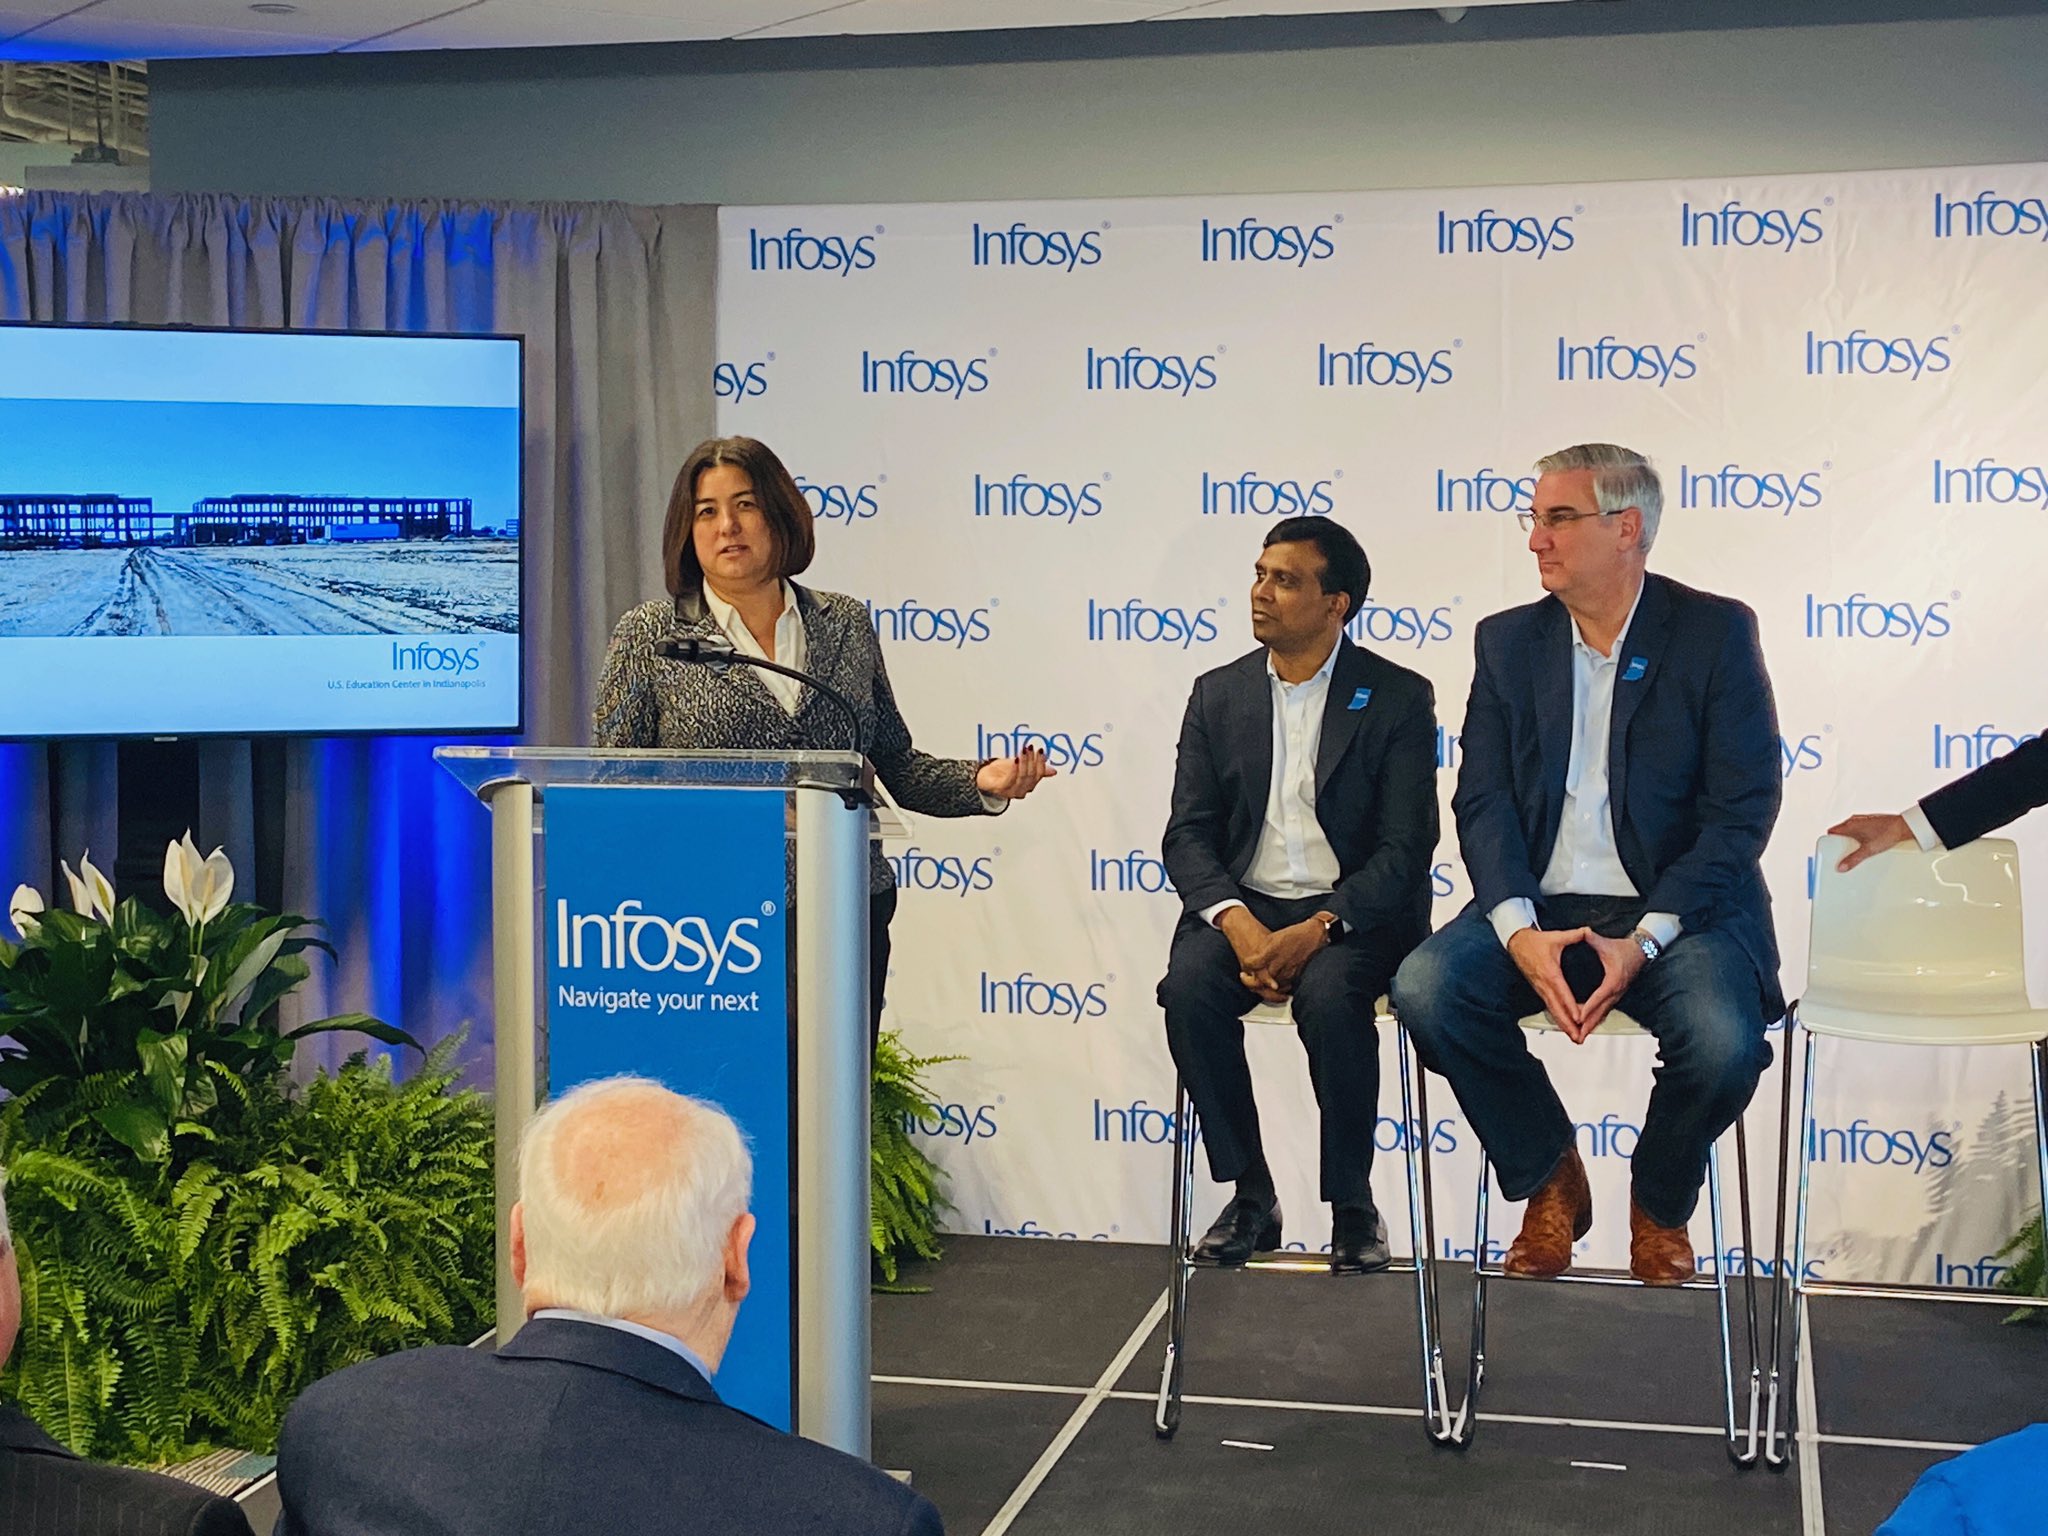 Infosys USA en Twitter: "„We are a believer in what Infosys is doing in talent development, investment, diversity and finding an untapped talent pool right here in the Midwest.“ - @NancyBerce, CIO, @